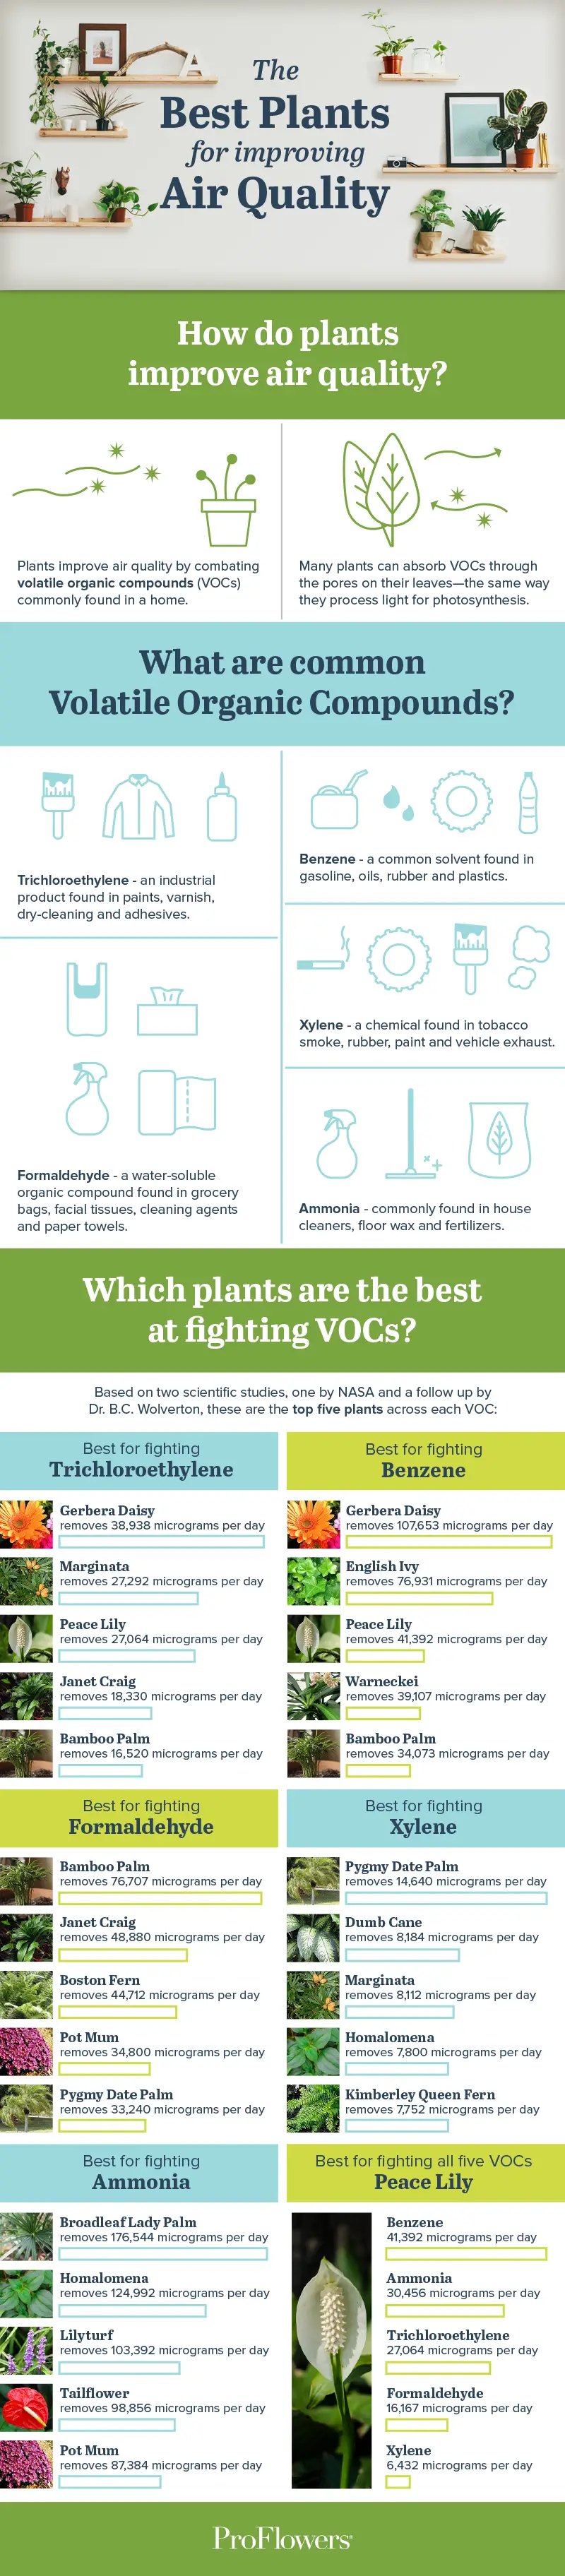 best-plants-for-improving-home-office-air-quality.png